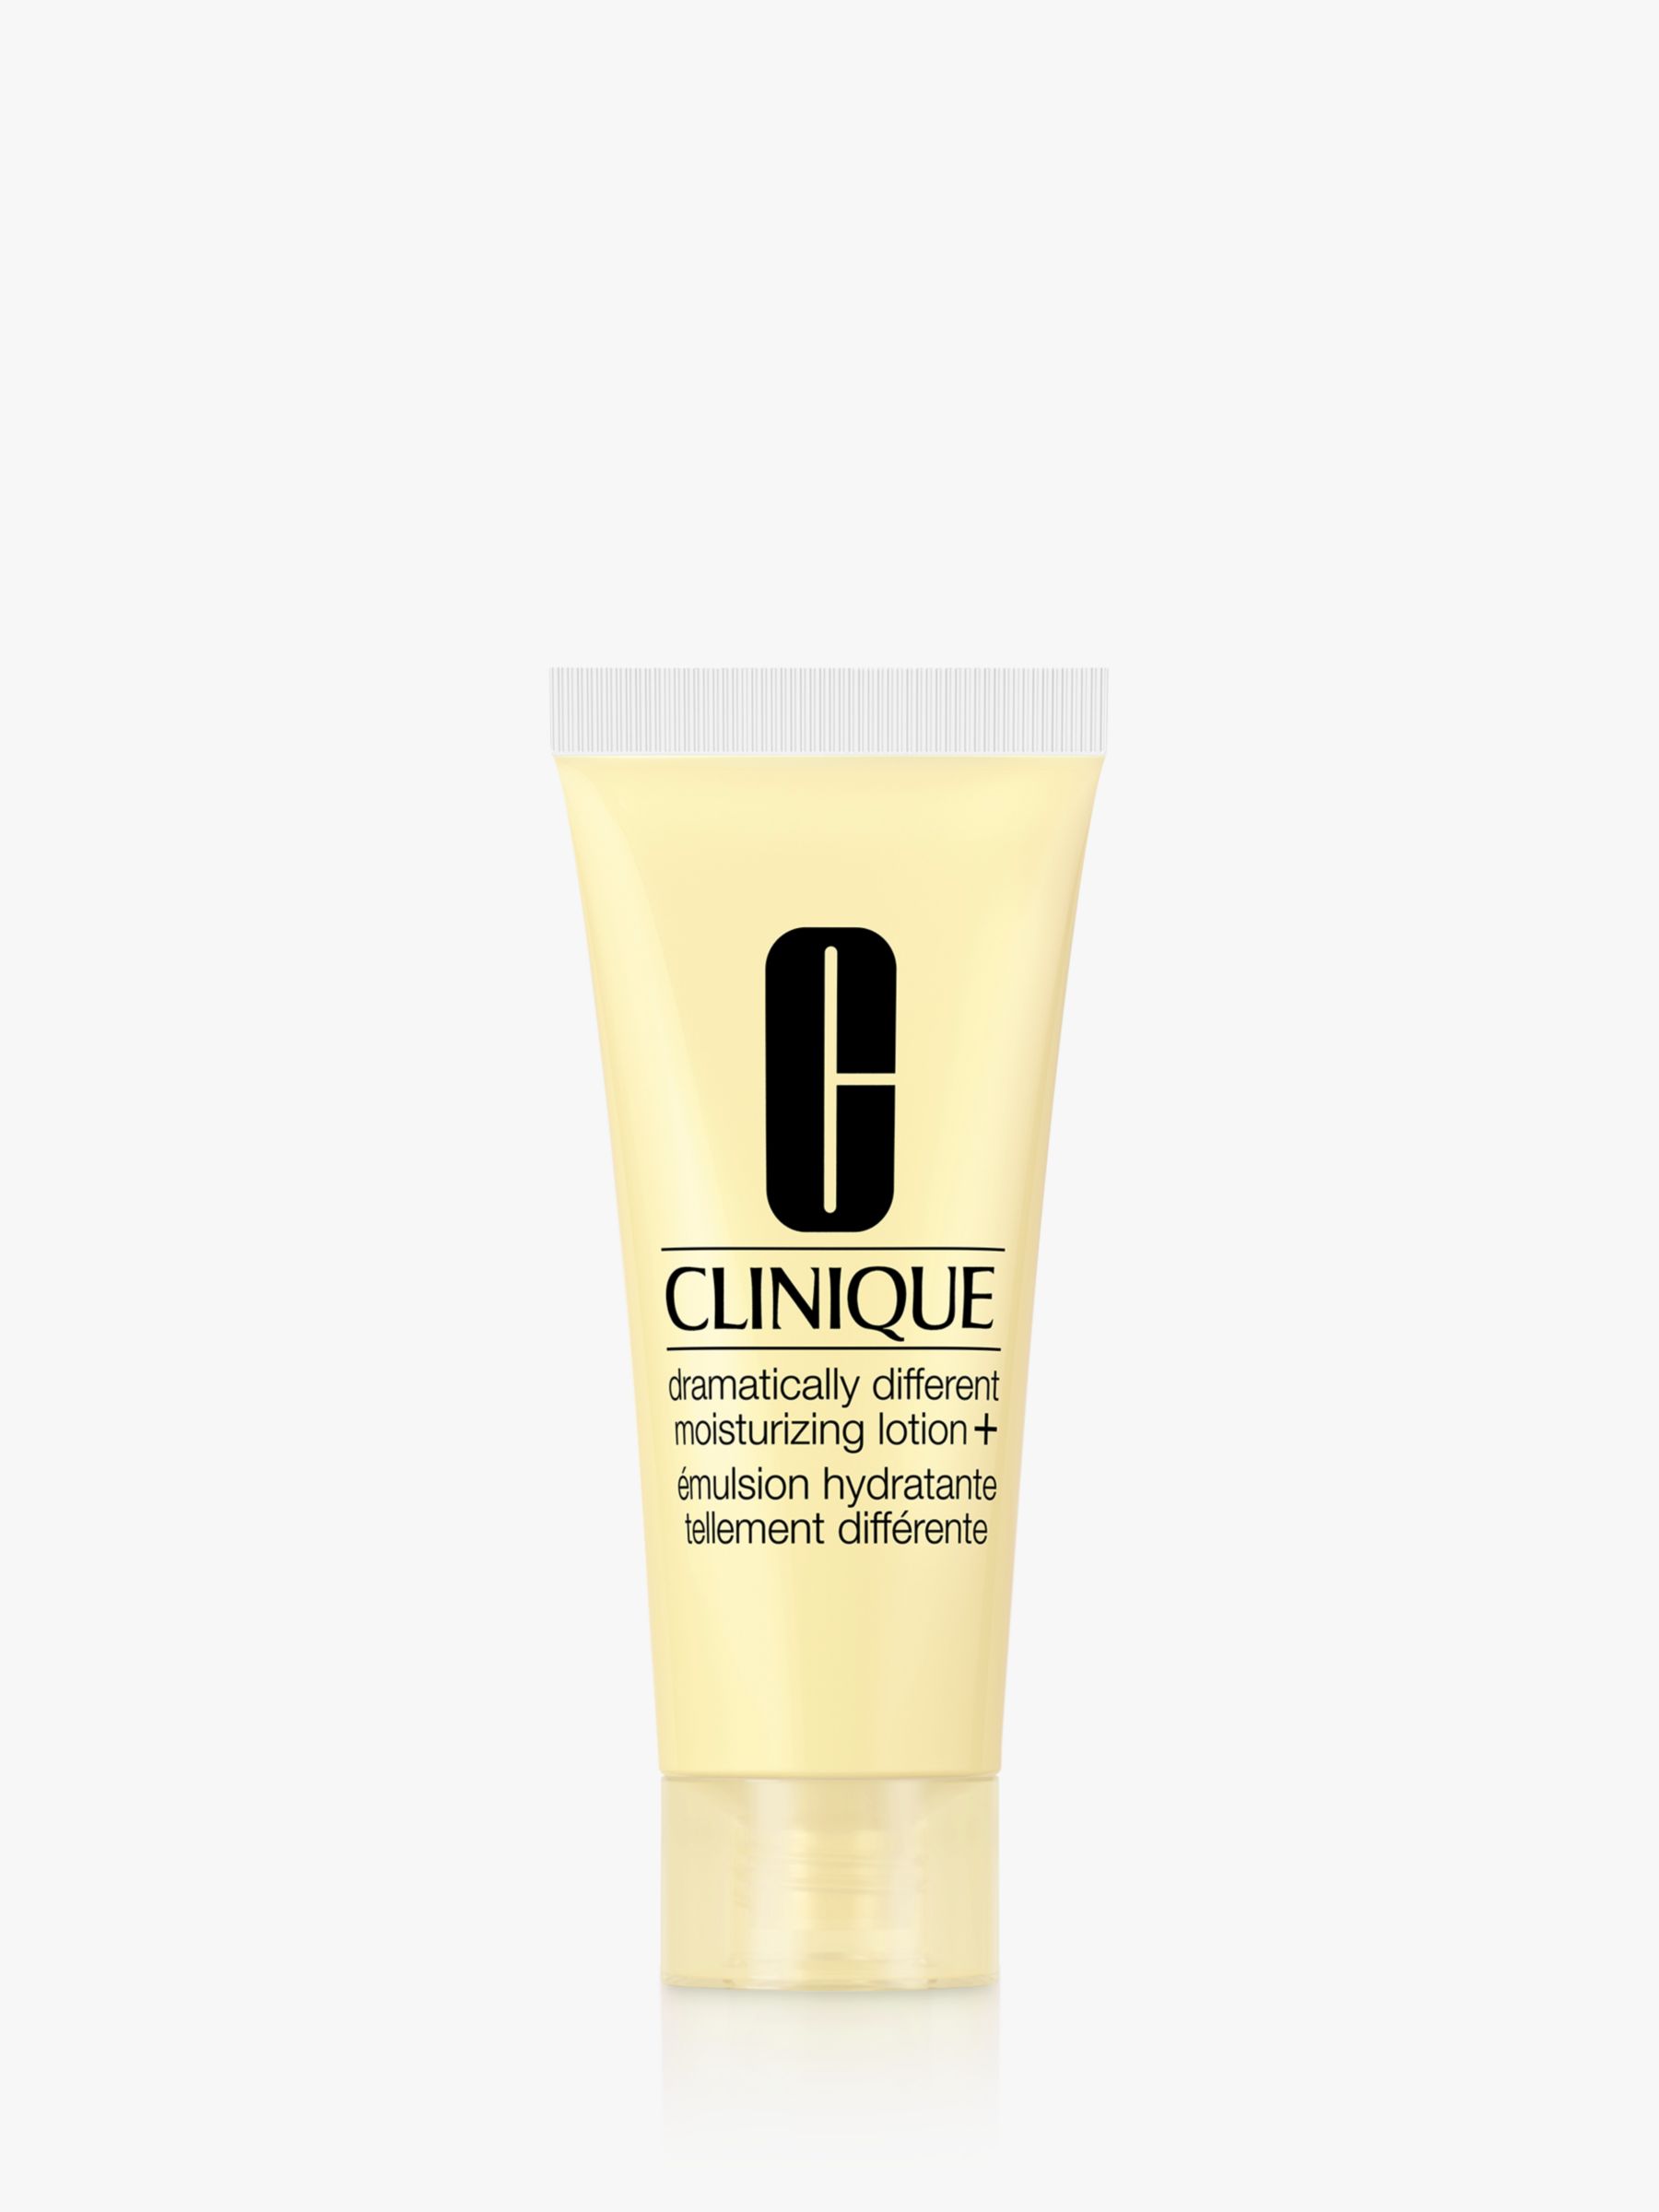 Clinique Dramatically Different Moisturising Lotion+, 15ml 1